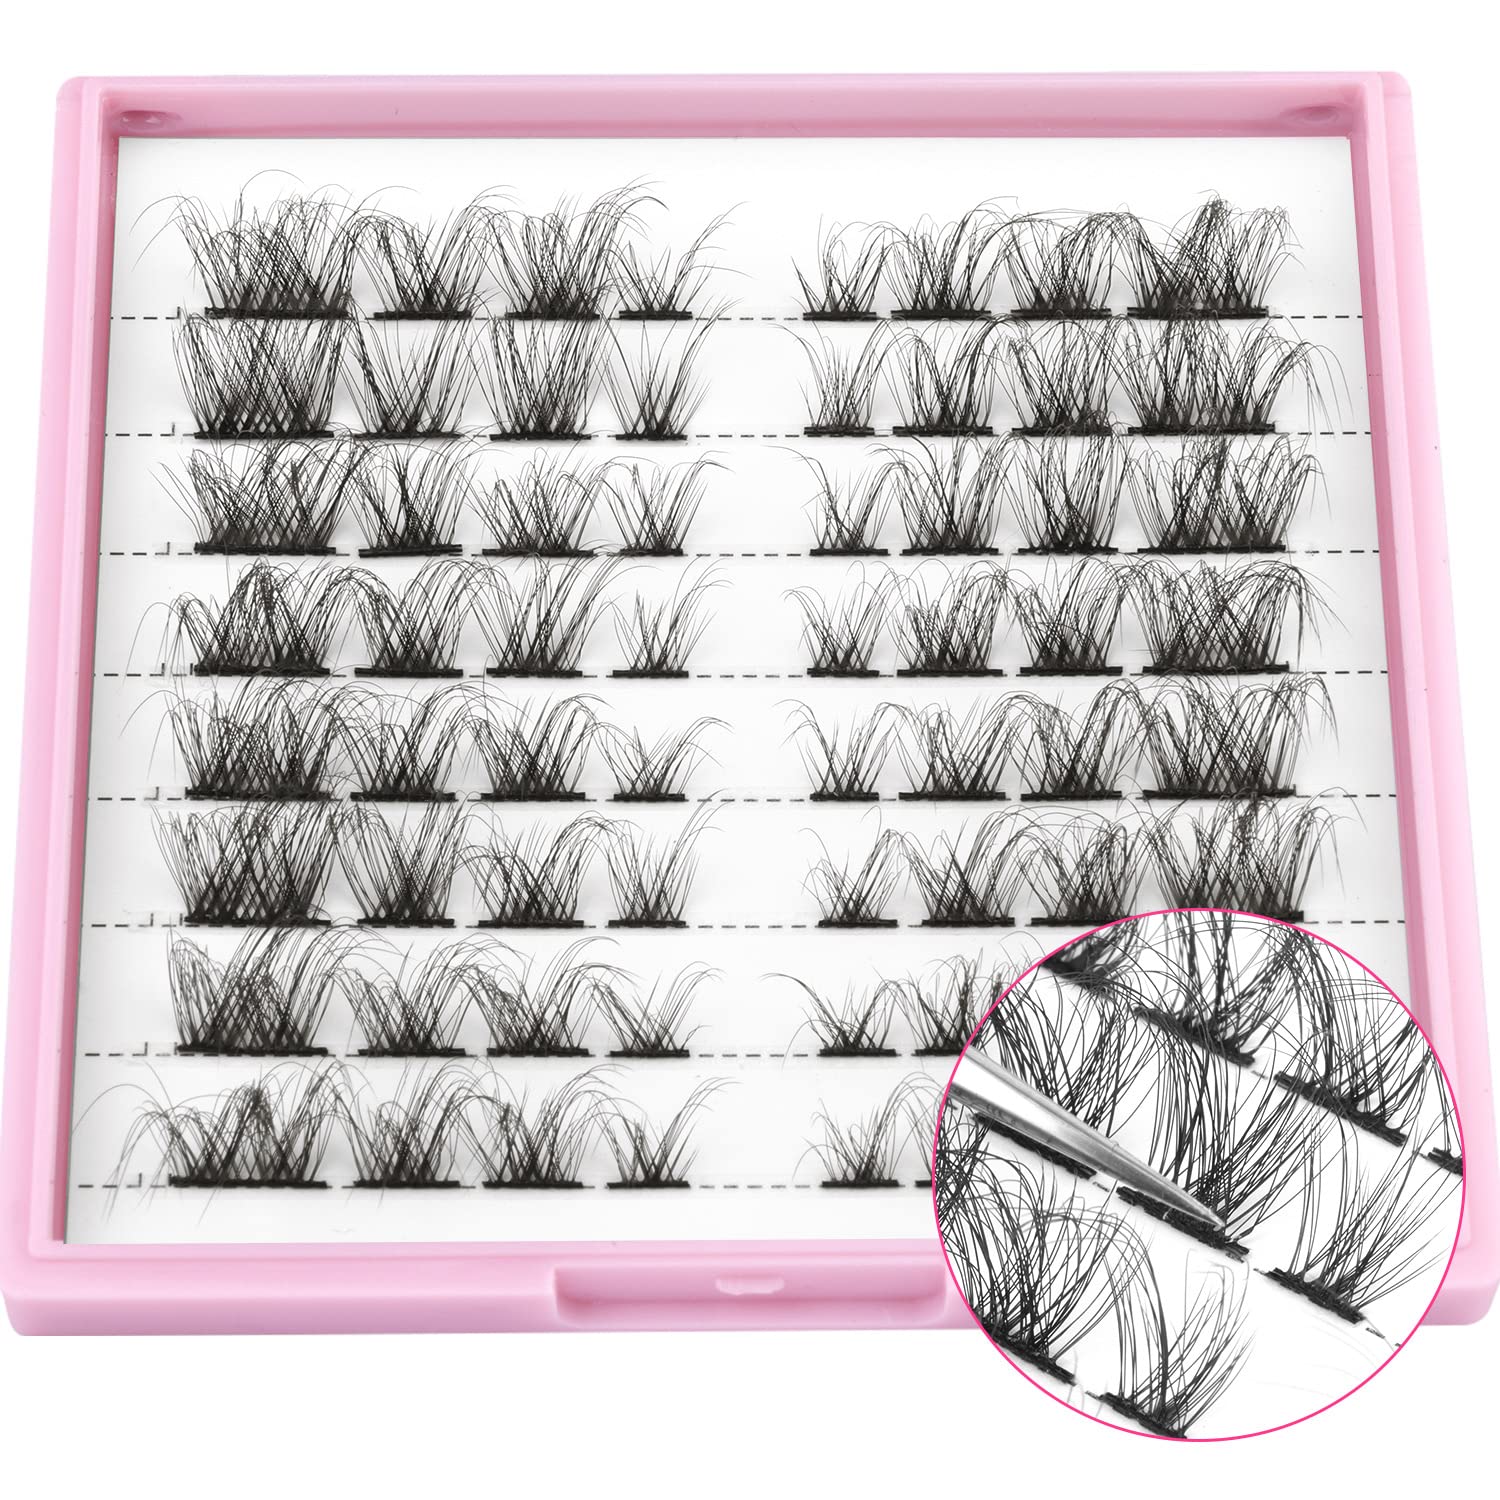 Lashes Clusters Wispy Natural Cluster Lashes 64pcs Individual Lashes Extensions 14-18MM Fluffy Cat Eye DIY Eyelash Extensions by Ruairie